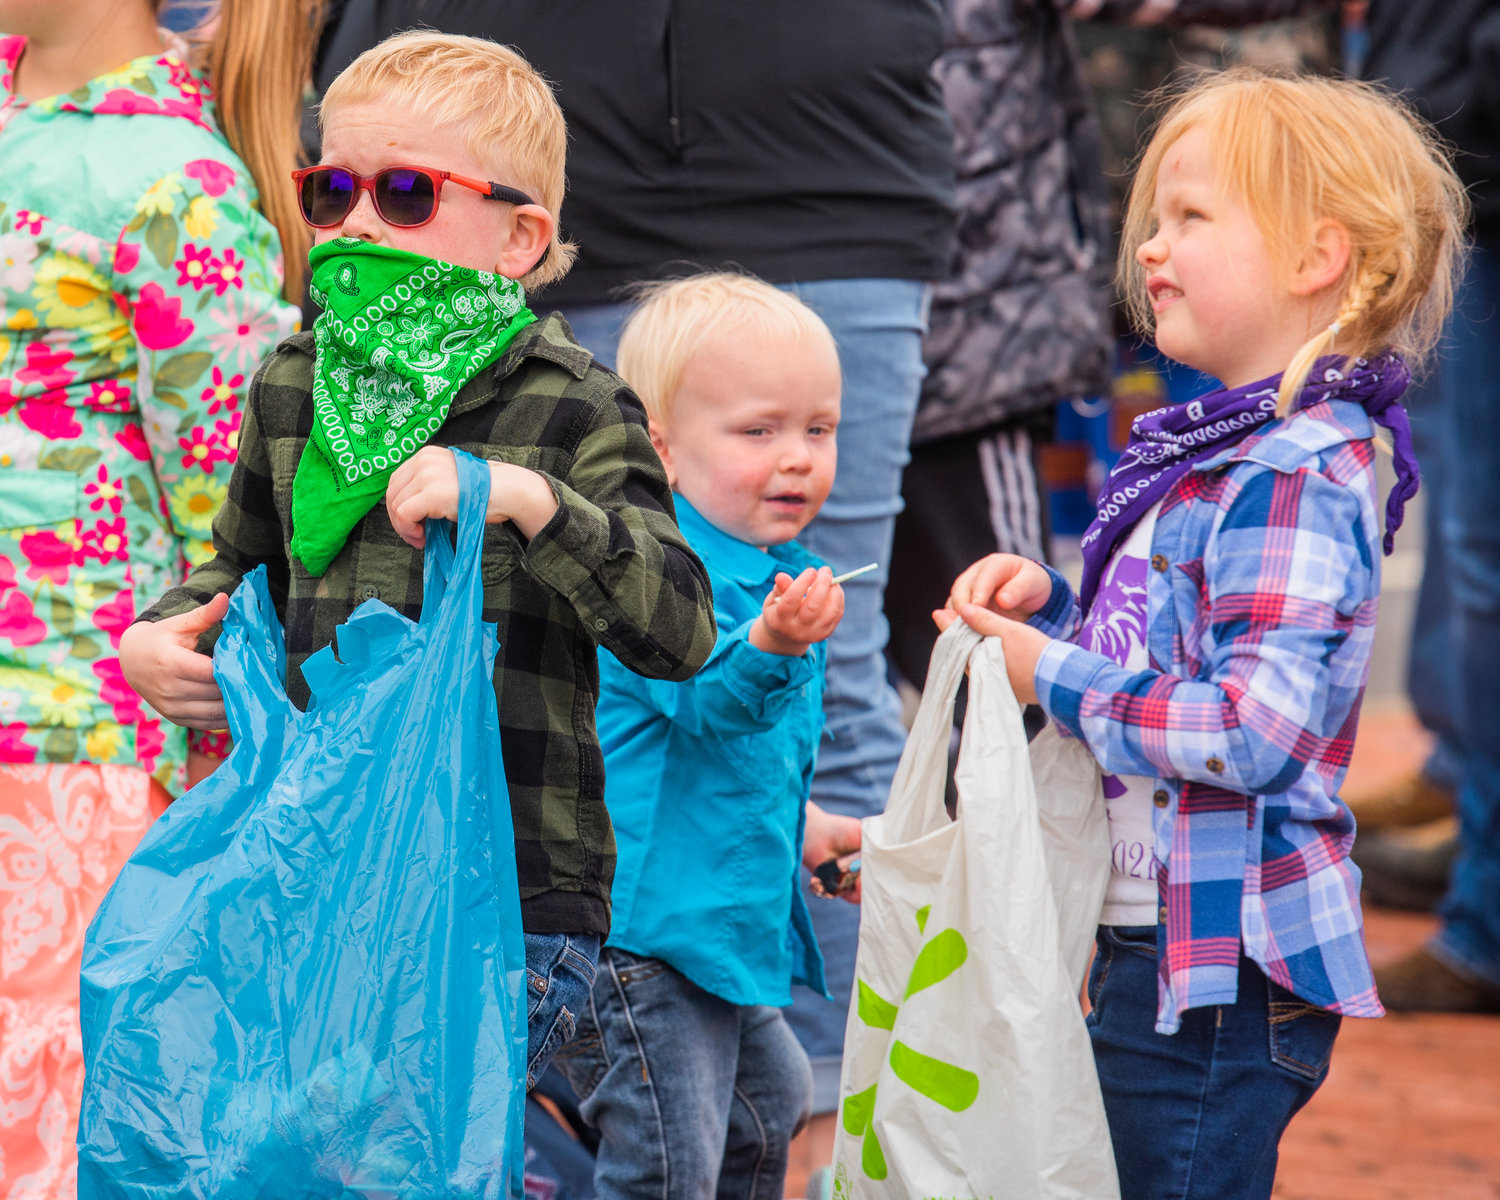 Kids sport bandanas and hold bags of candy during the Vader May Day Parade Saturday morning.